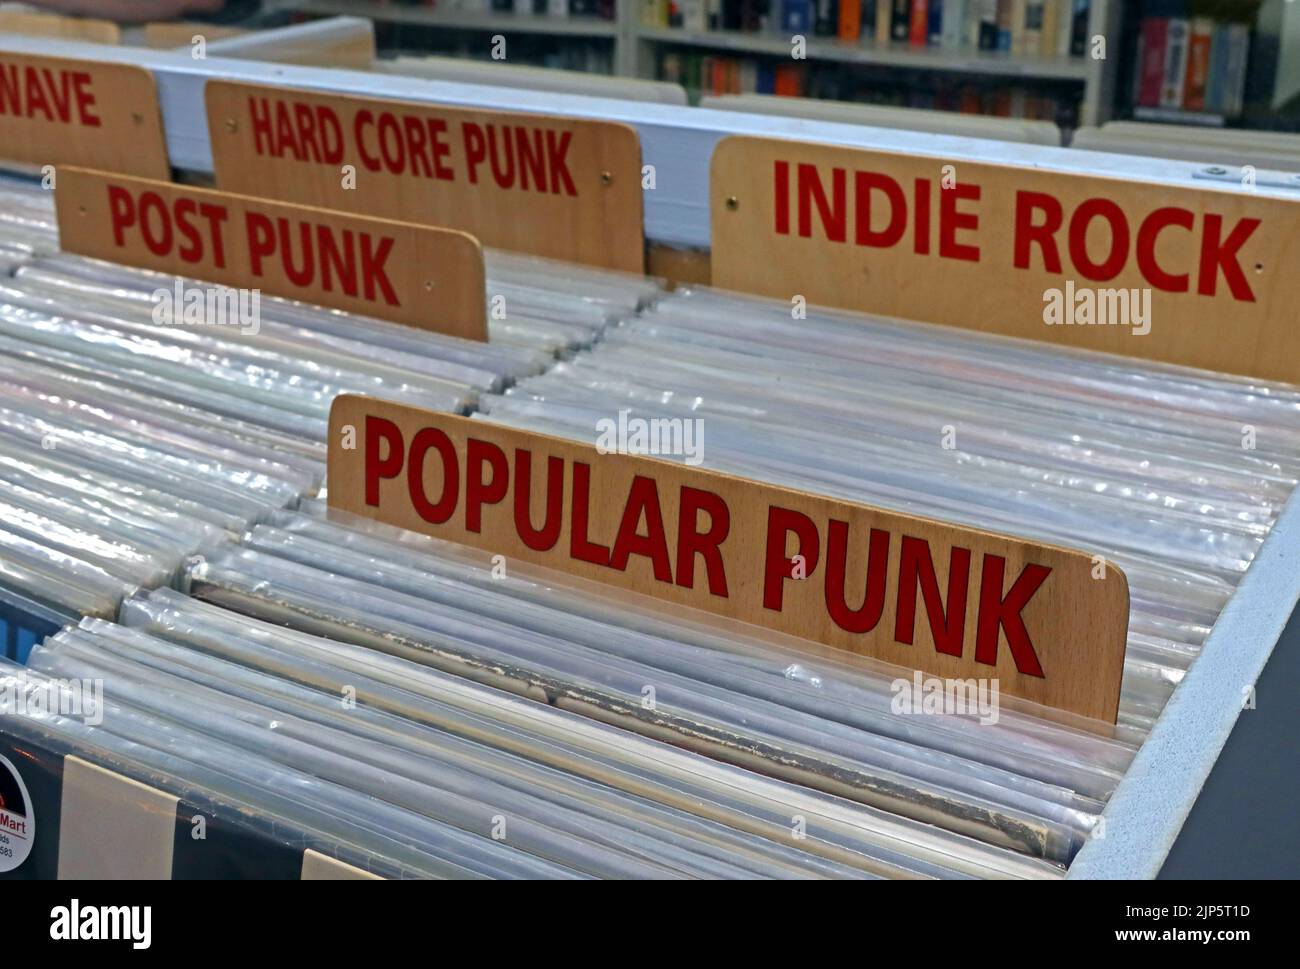 Punk and Indie, Record Mart, An independent record and vinyl shop Dagfields, near Audlem, Nantwich, Crewe , Cheshire, England, UK, CW5 7LG Stock Photo